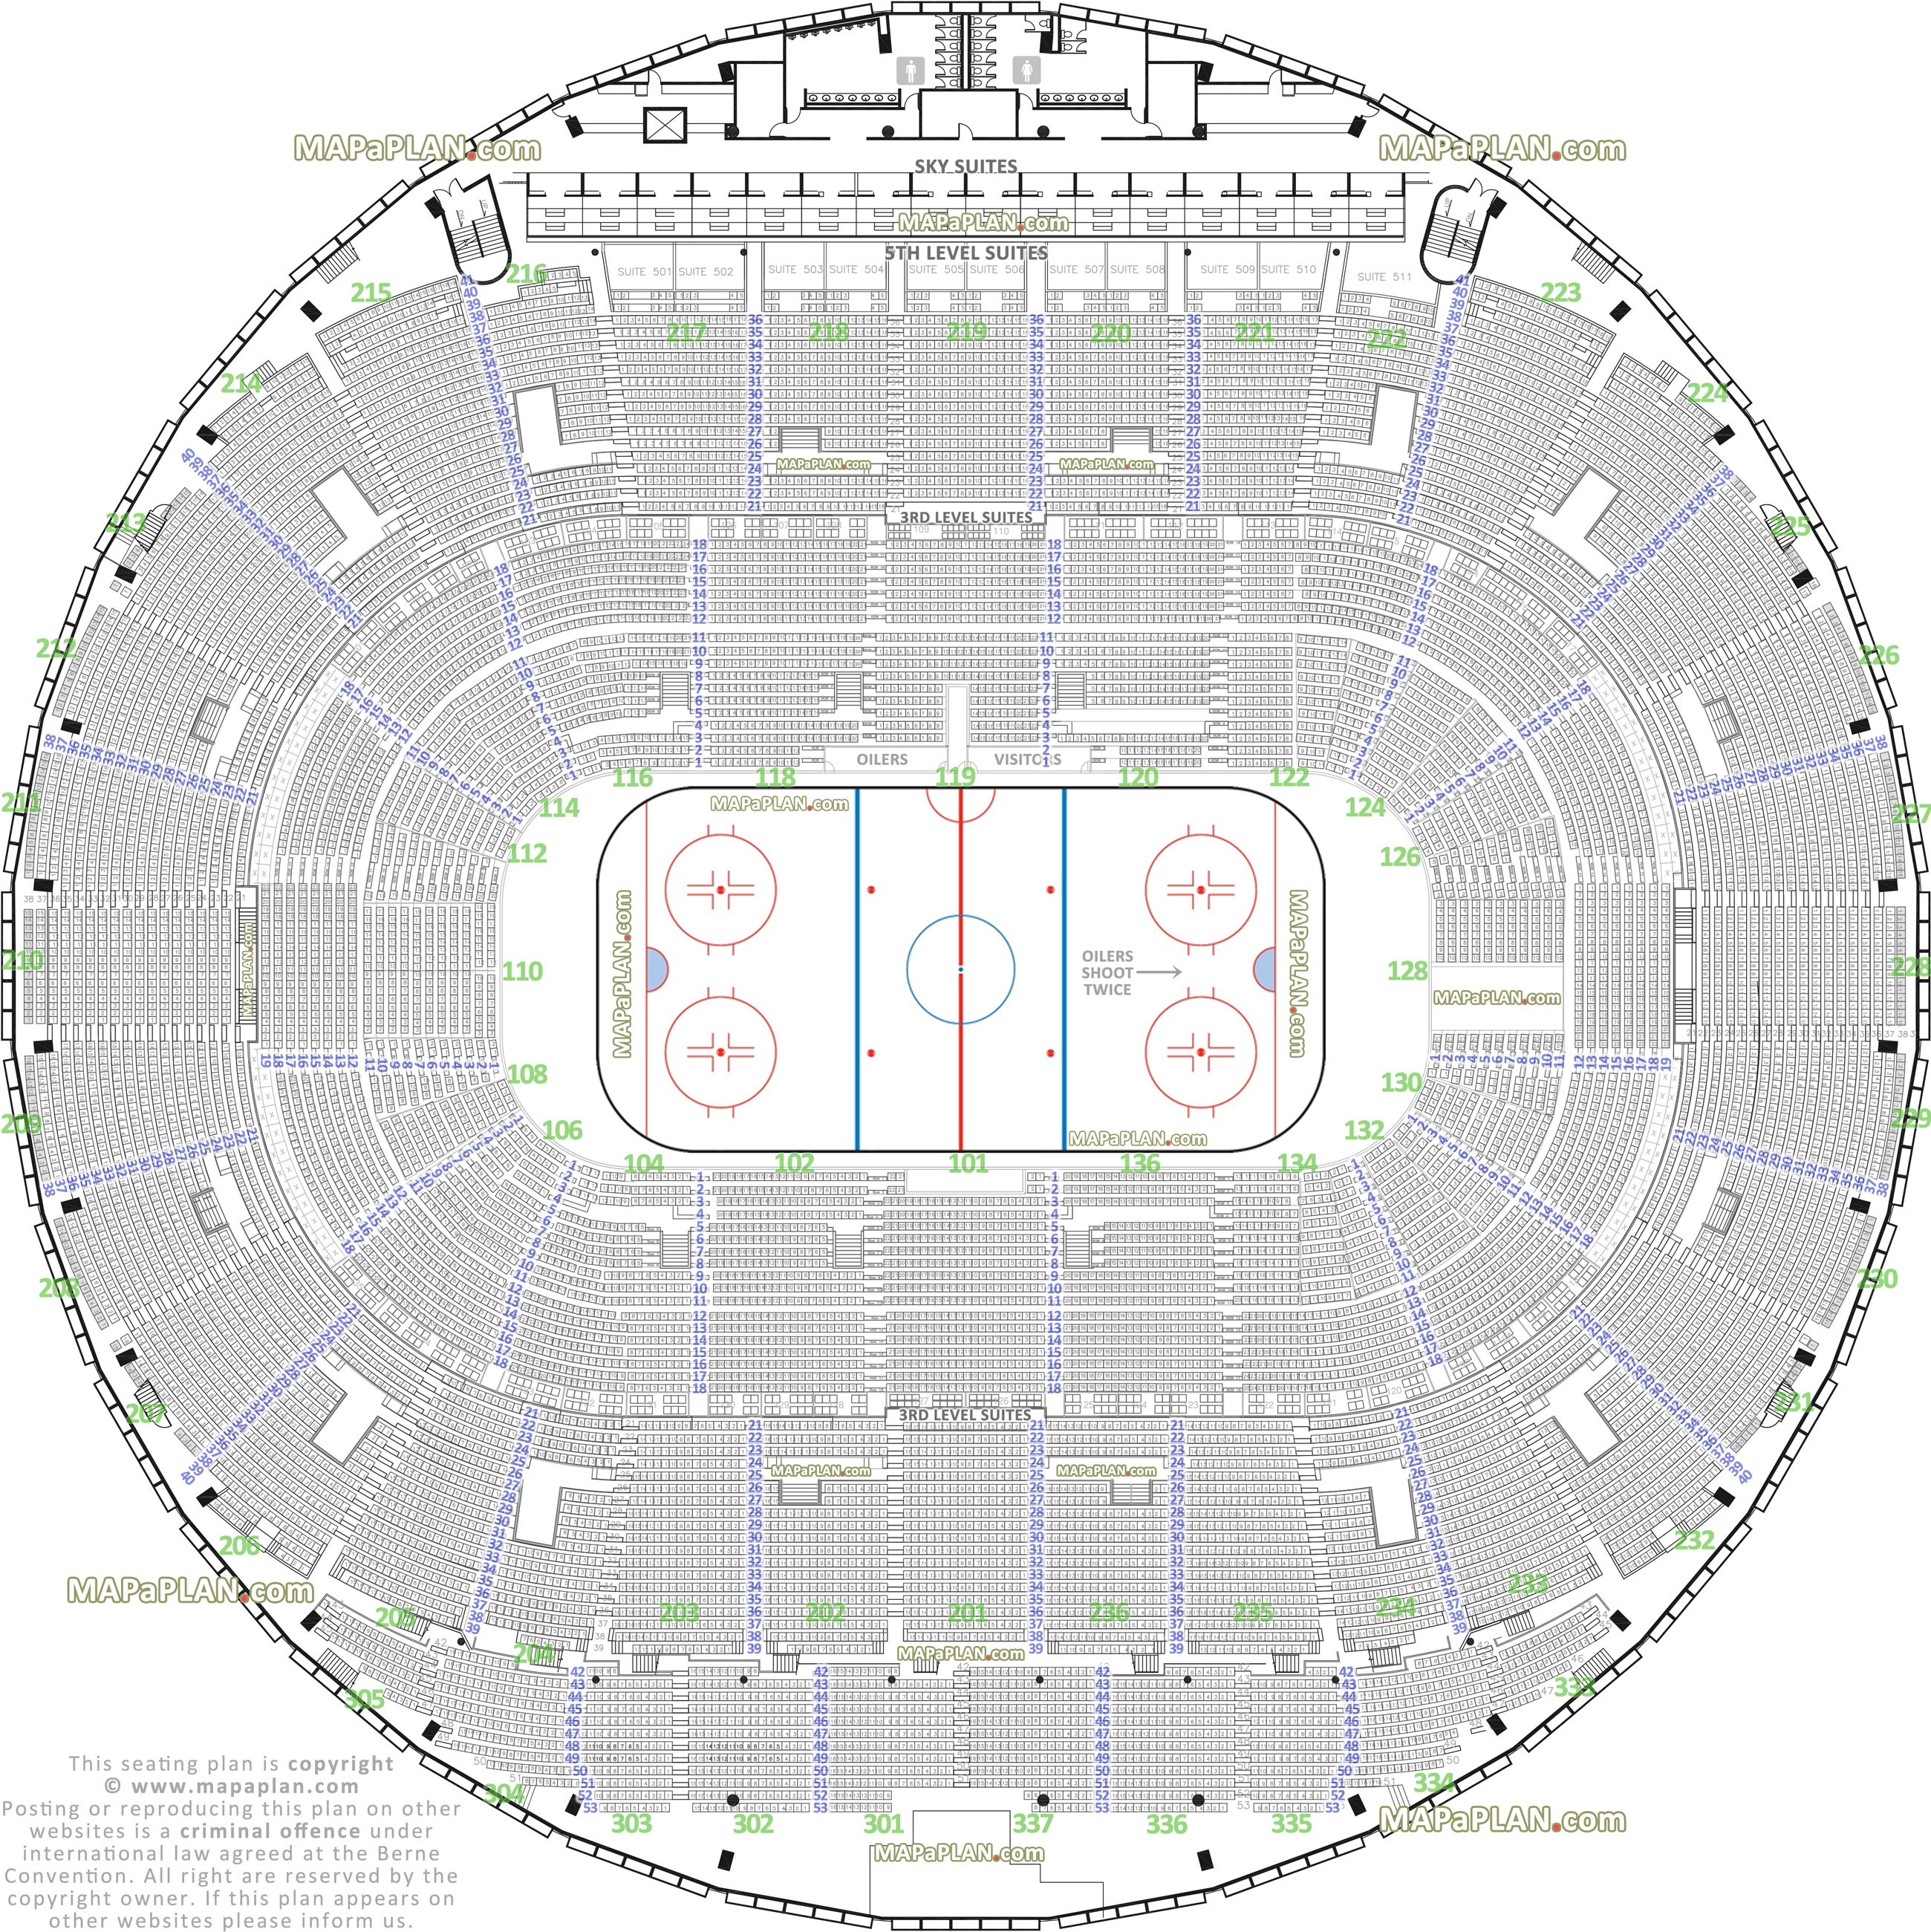 edmonton oilers nhl oil kings ice hockey game rink exact venue map with gold silver club executive terrace colonnade gallery box suites individual seat finder Edmonton Northlands Coliseum seating chart